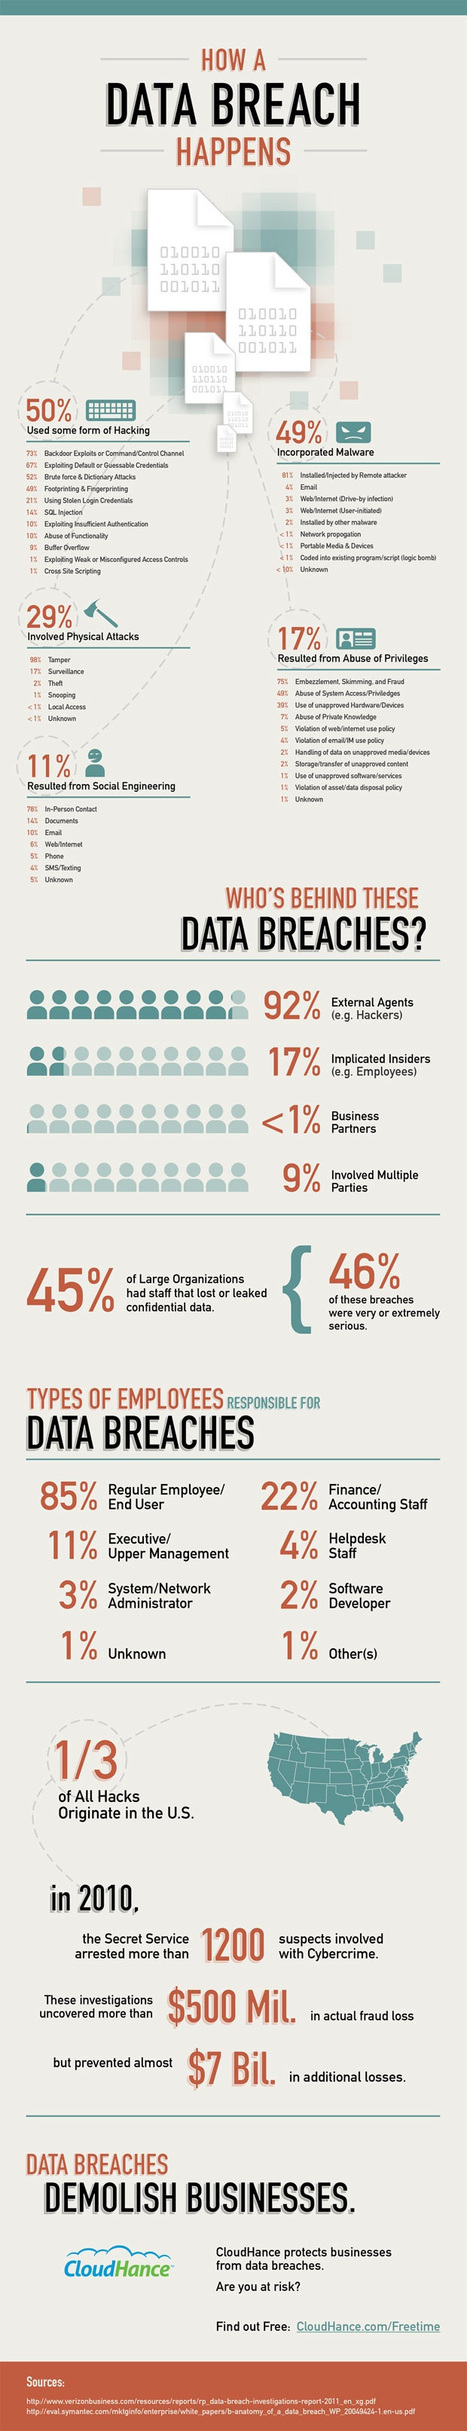 INFOGRAPHIC: How A Data Breach Happens | Information Technology & Social Media News | Scoop.it